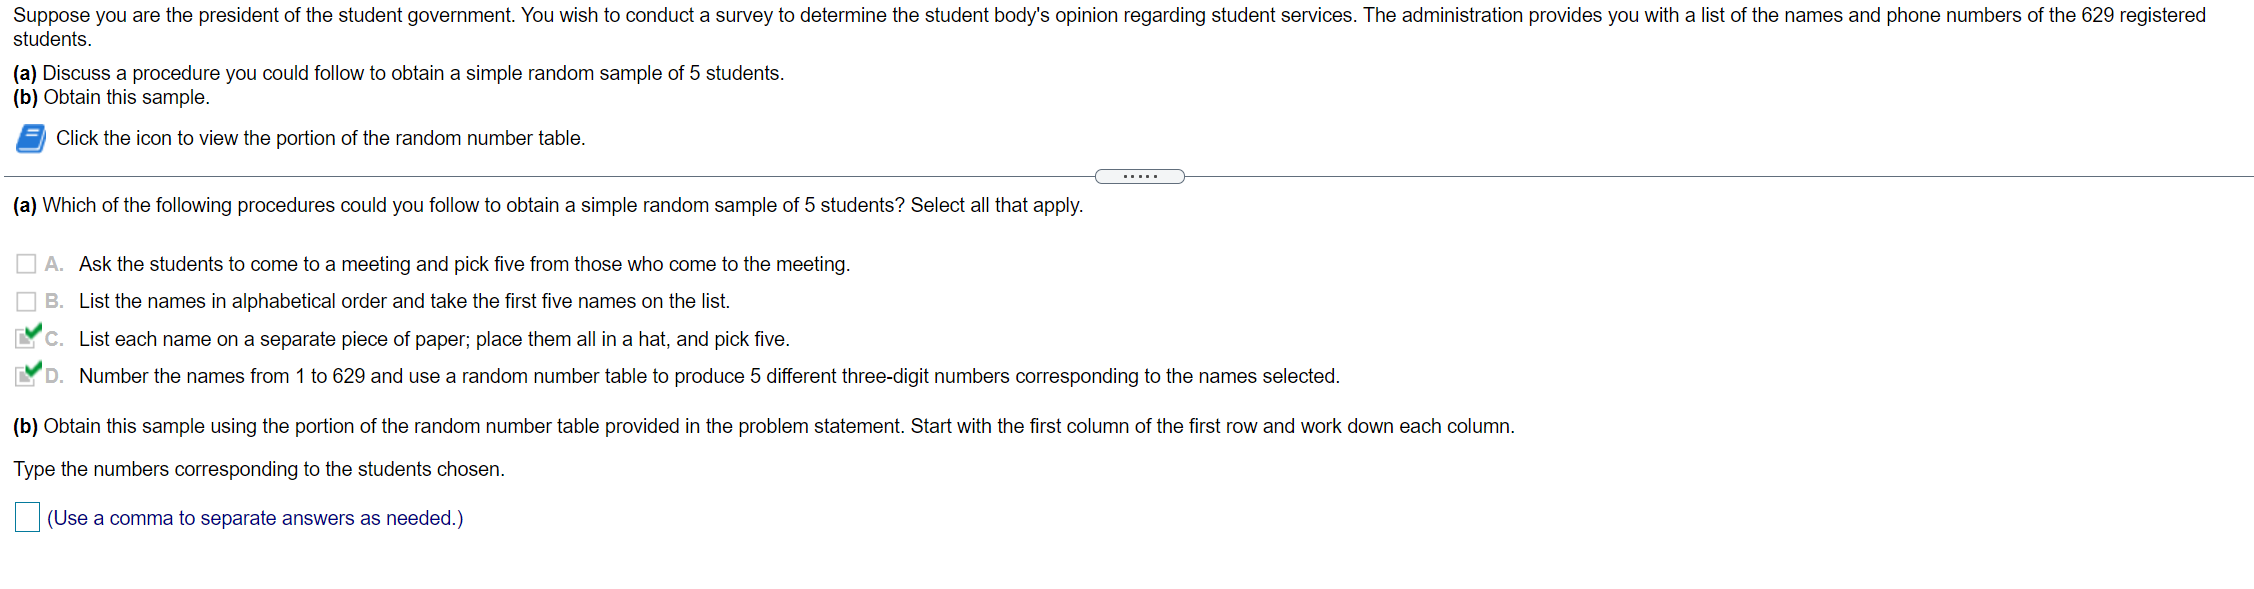 Suppose You Are The President Of The Student Government You Wish To Conduct A Survey To Determine The Student Body S Op 1